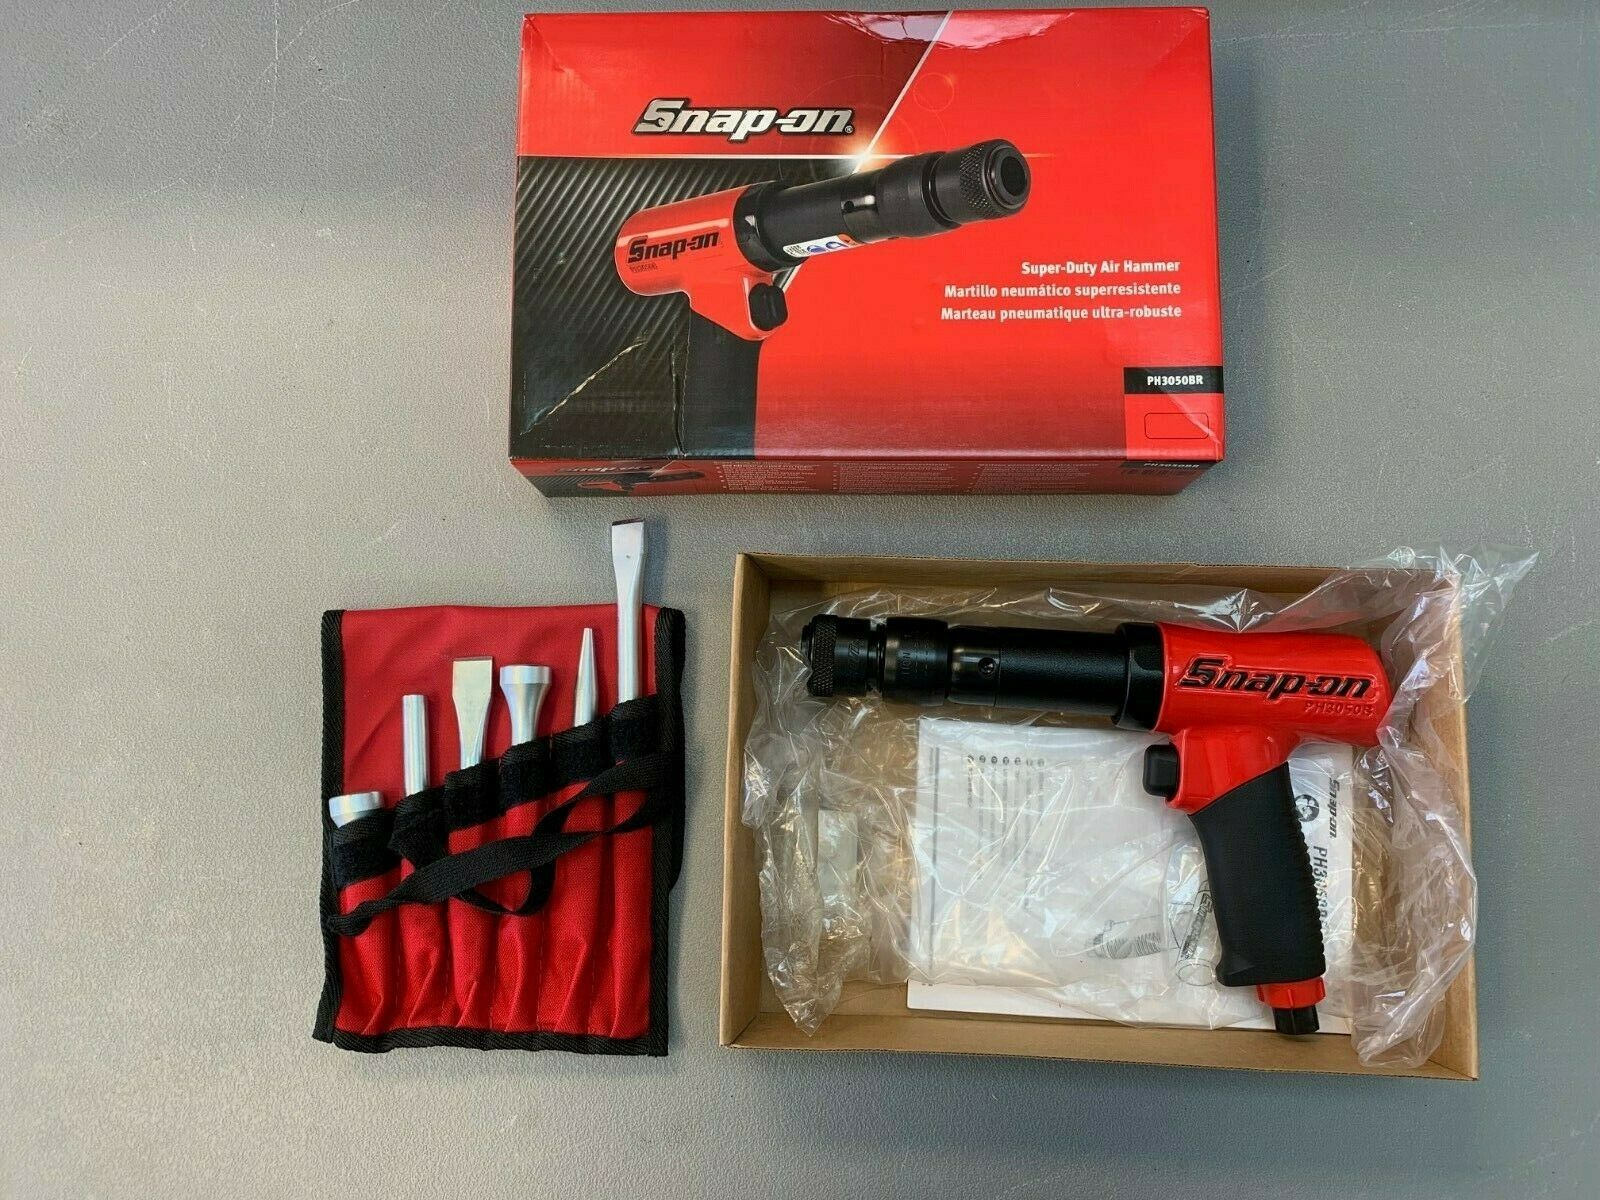 New Snap On Super Duty Air Hammer, Red Color, With New 6 Piece Bit Set